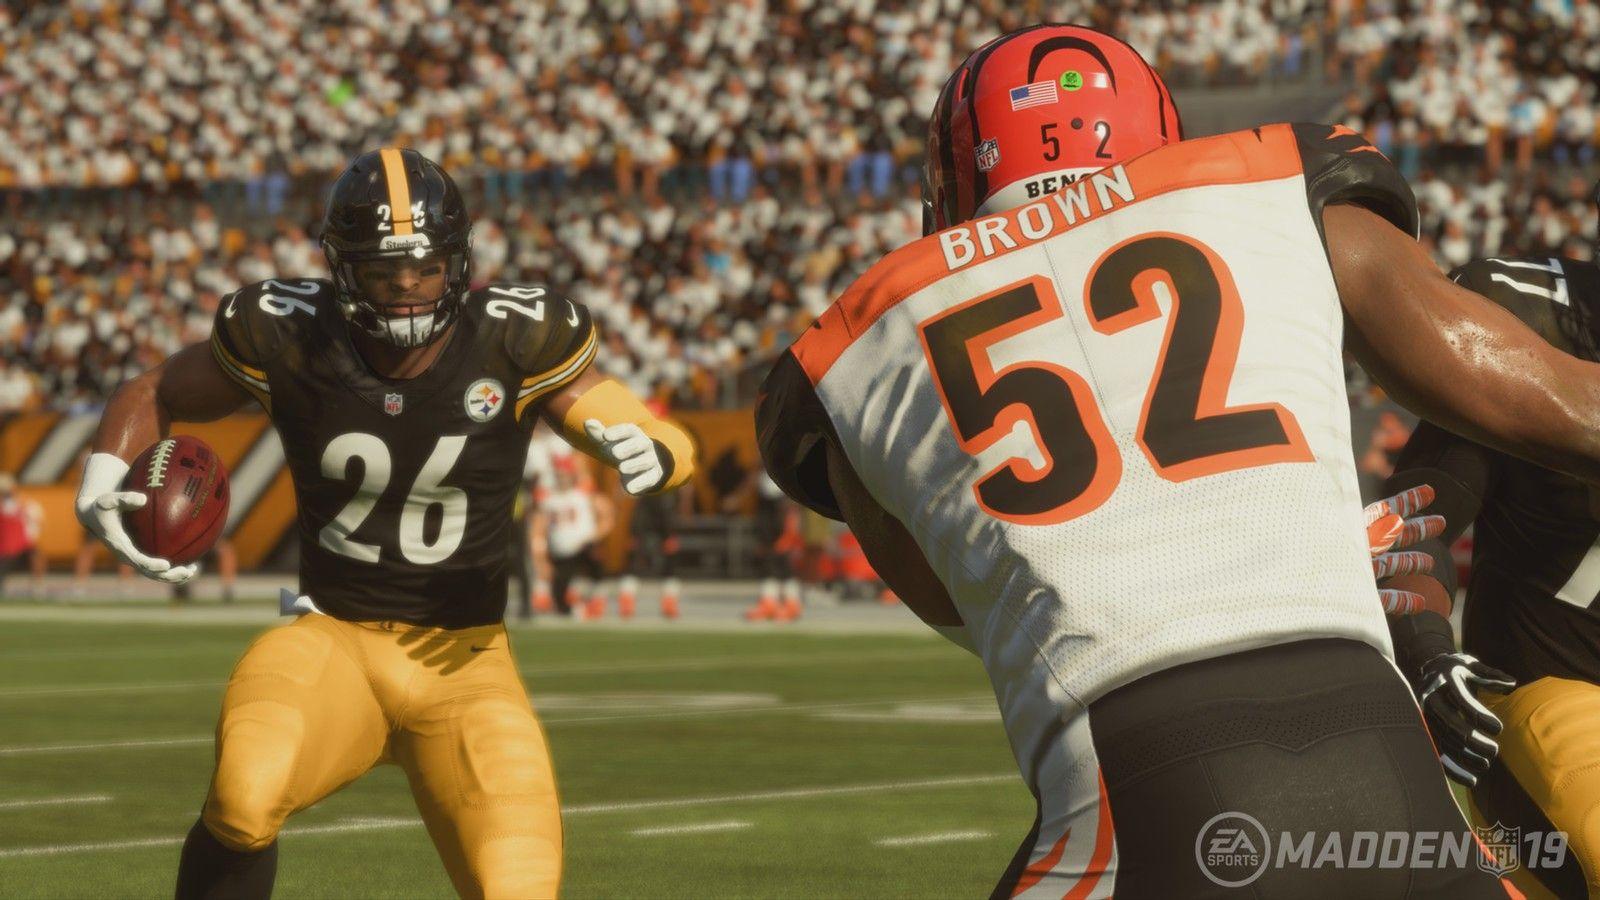 Madden NFL 19 for PlayStation 4: Everything you need to know